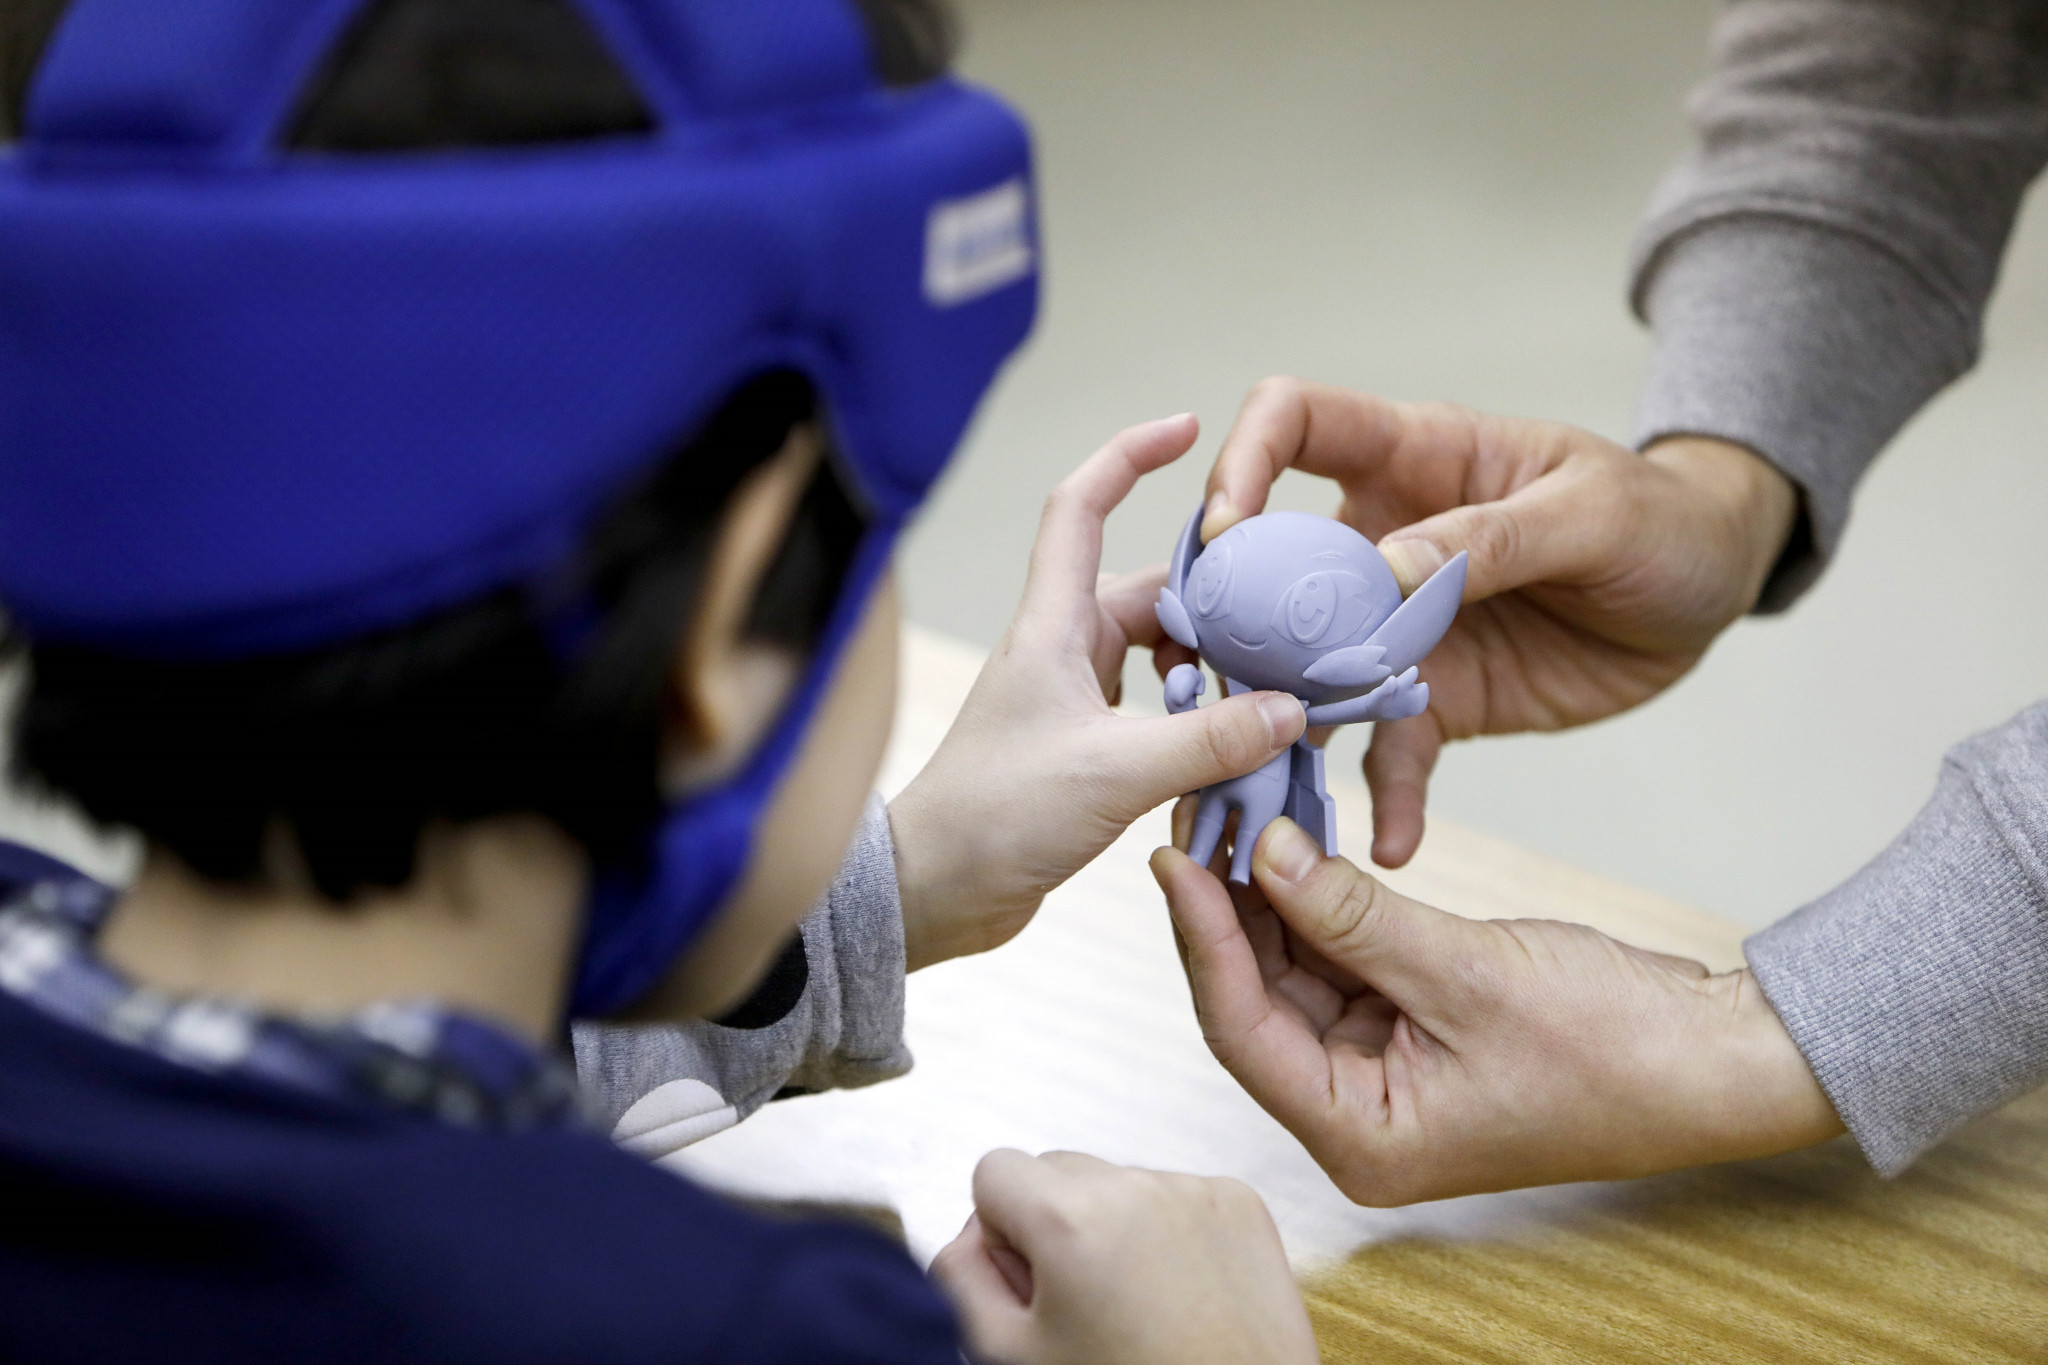 Organisers have created models to help children with impairments be part of the process ©Tokyo 2020